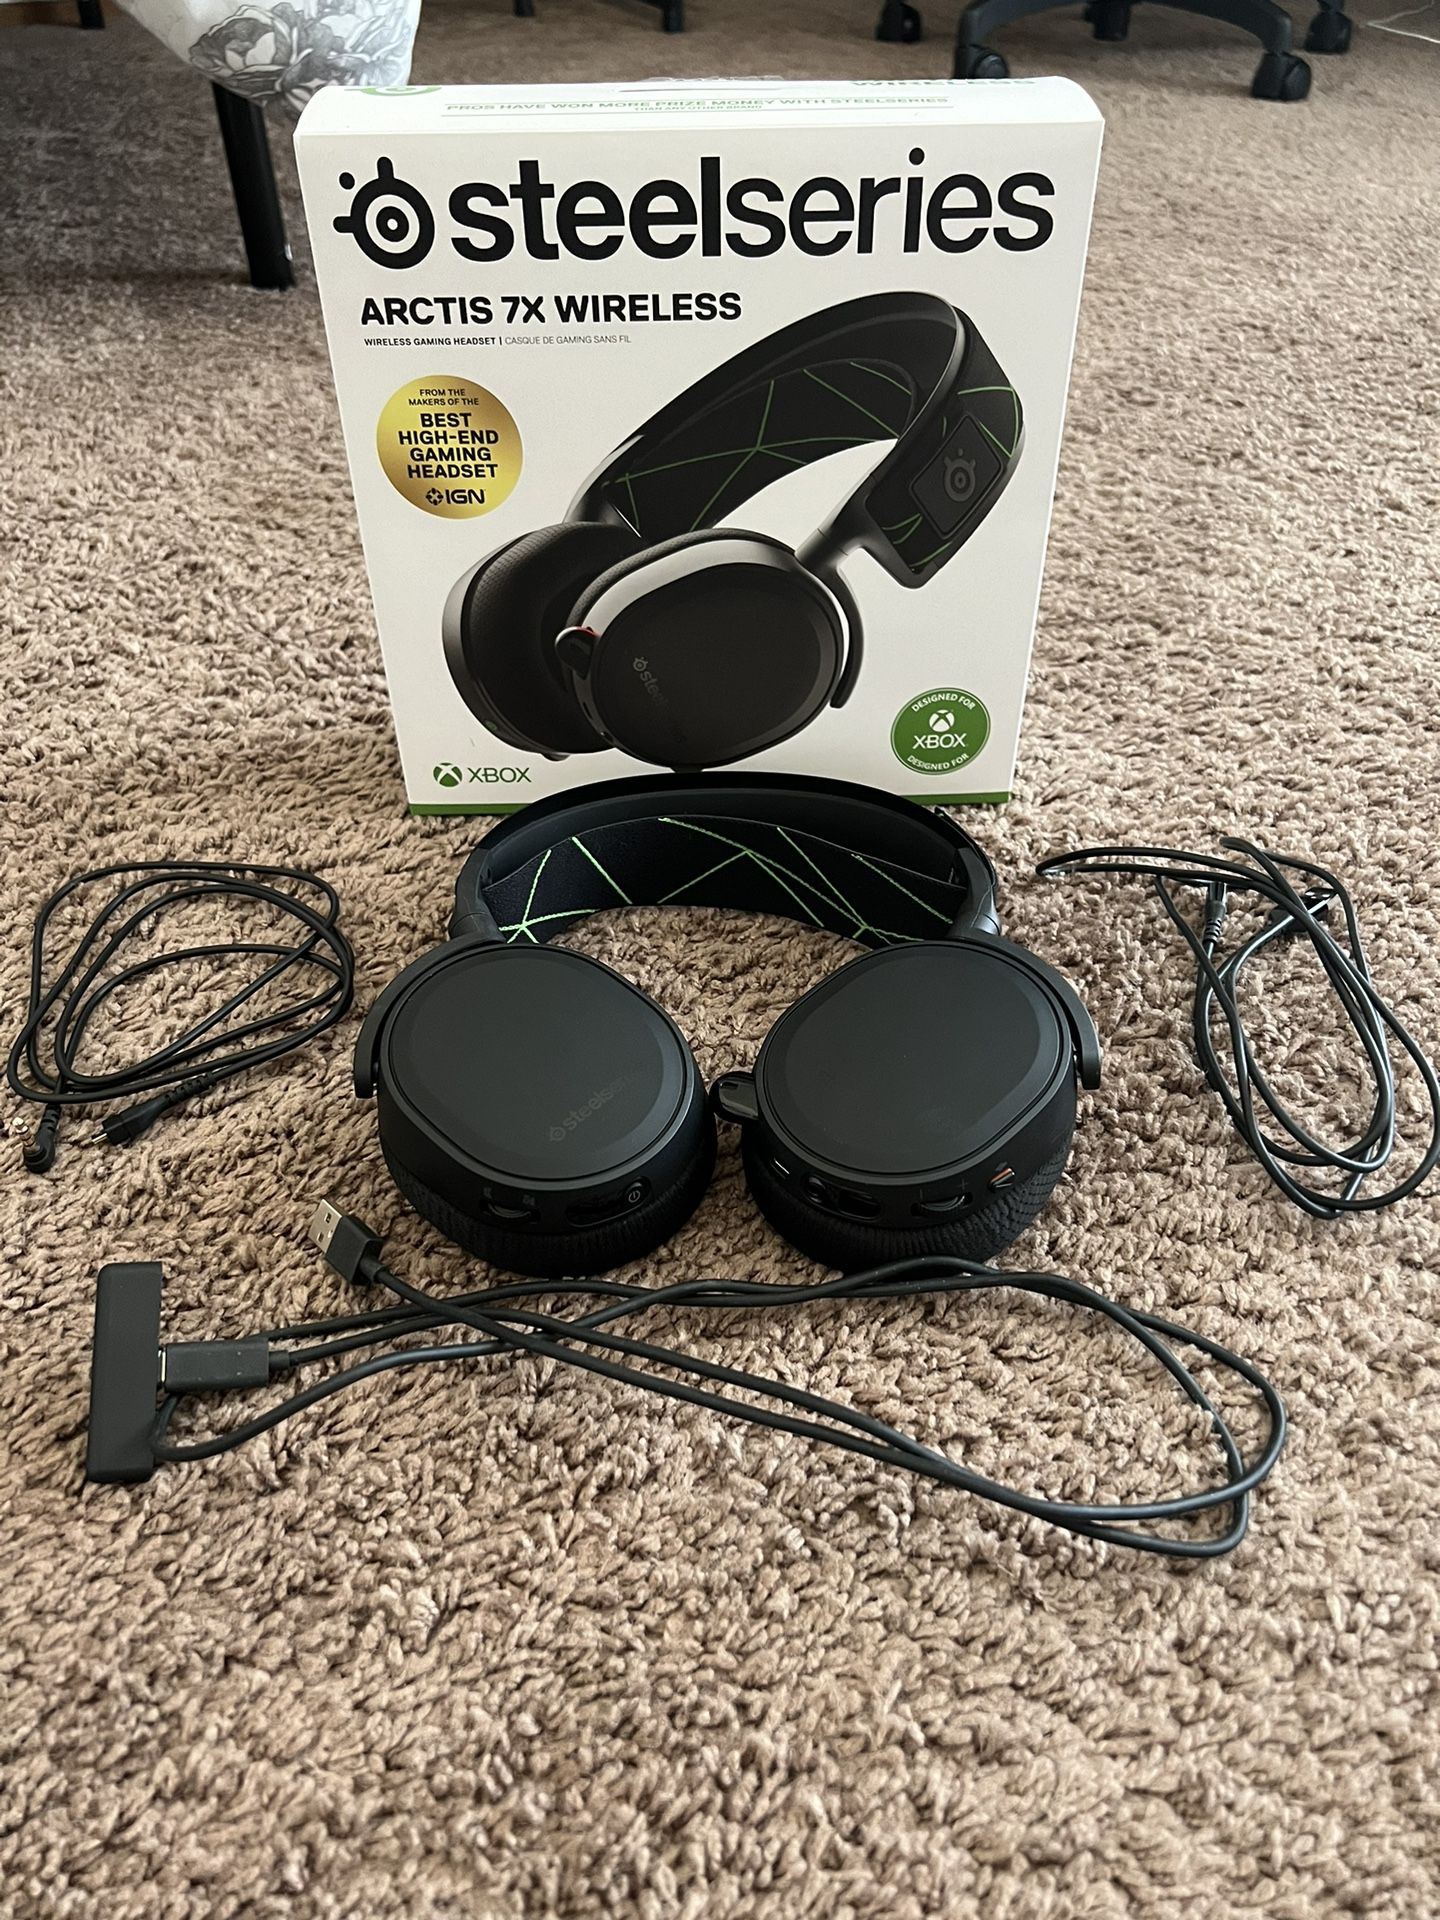 SteelSeries 7x+ Wireless Headset For Xbox